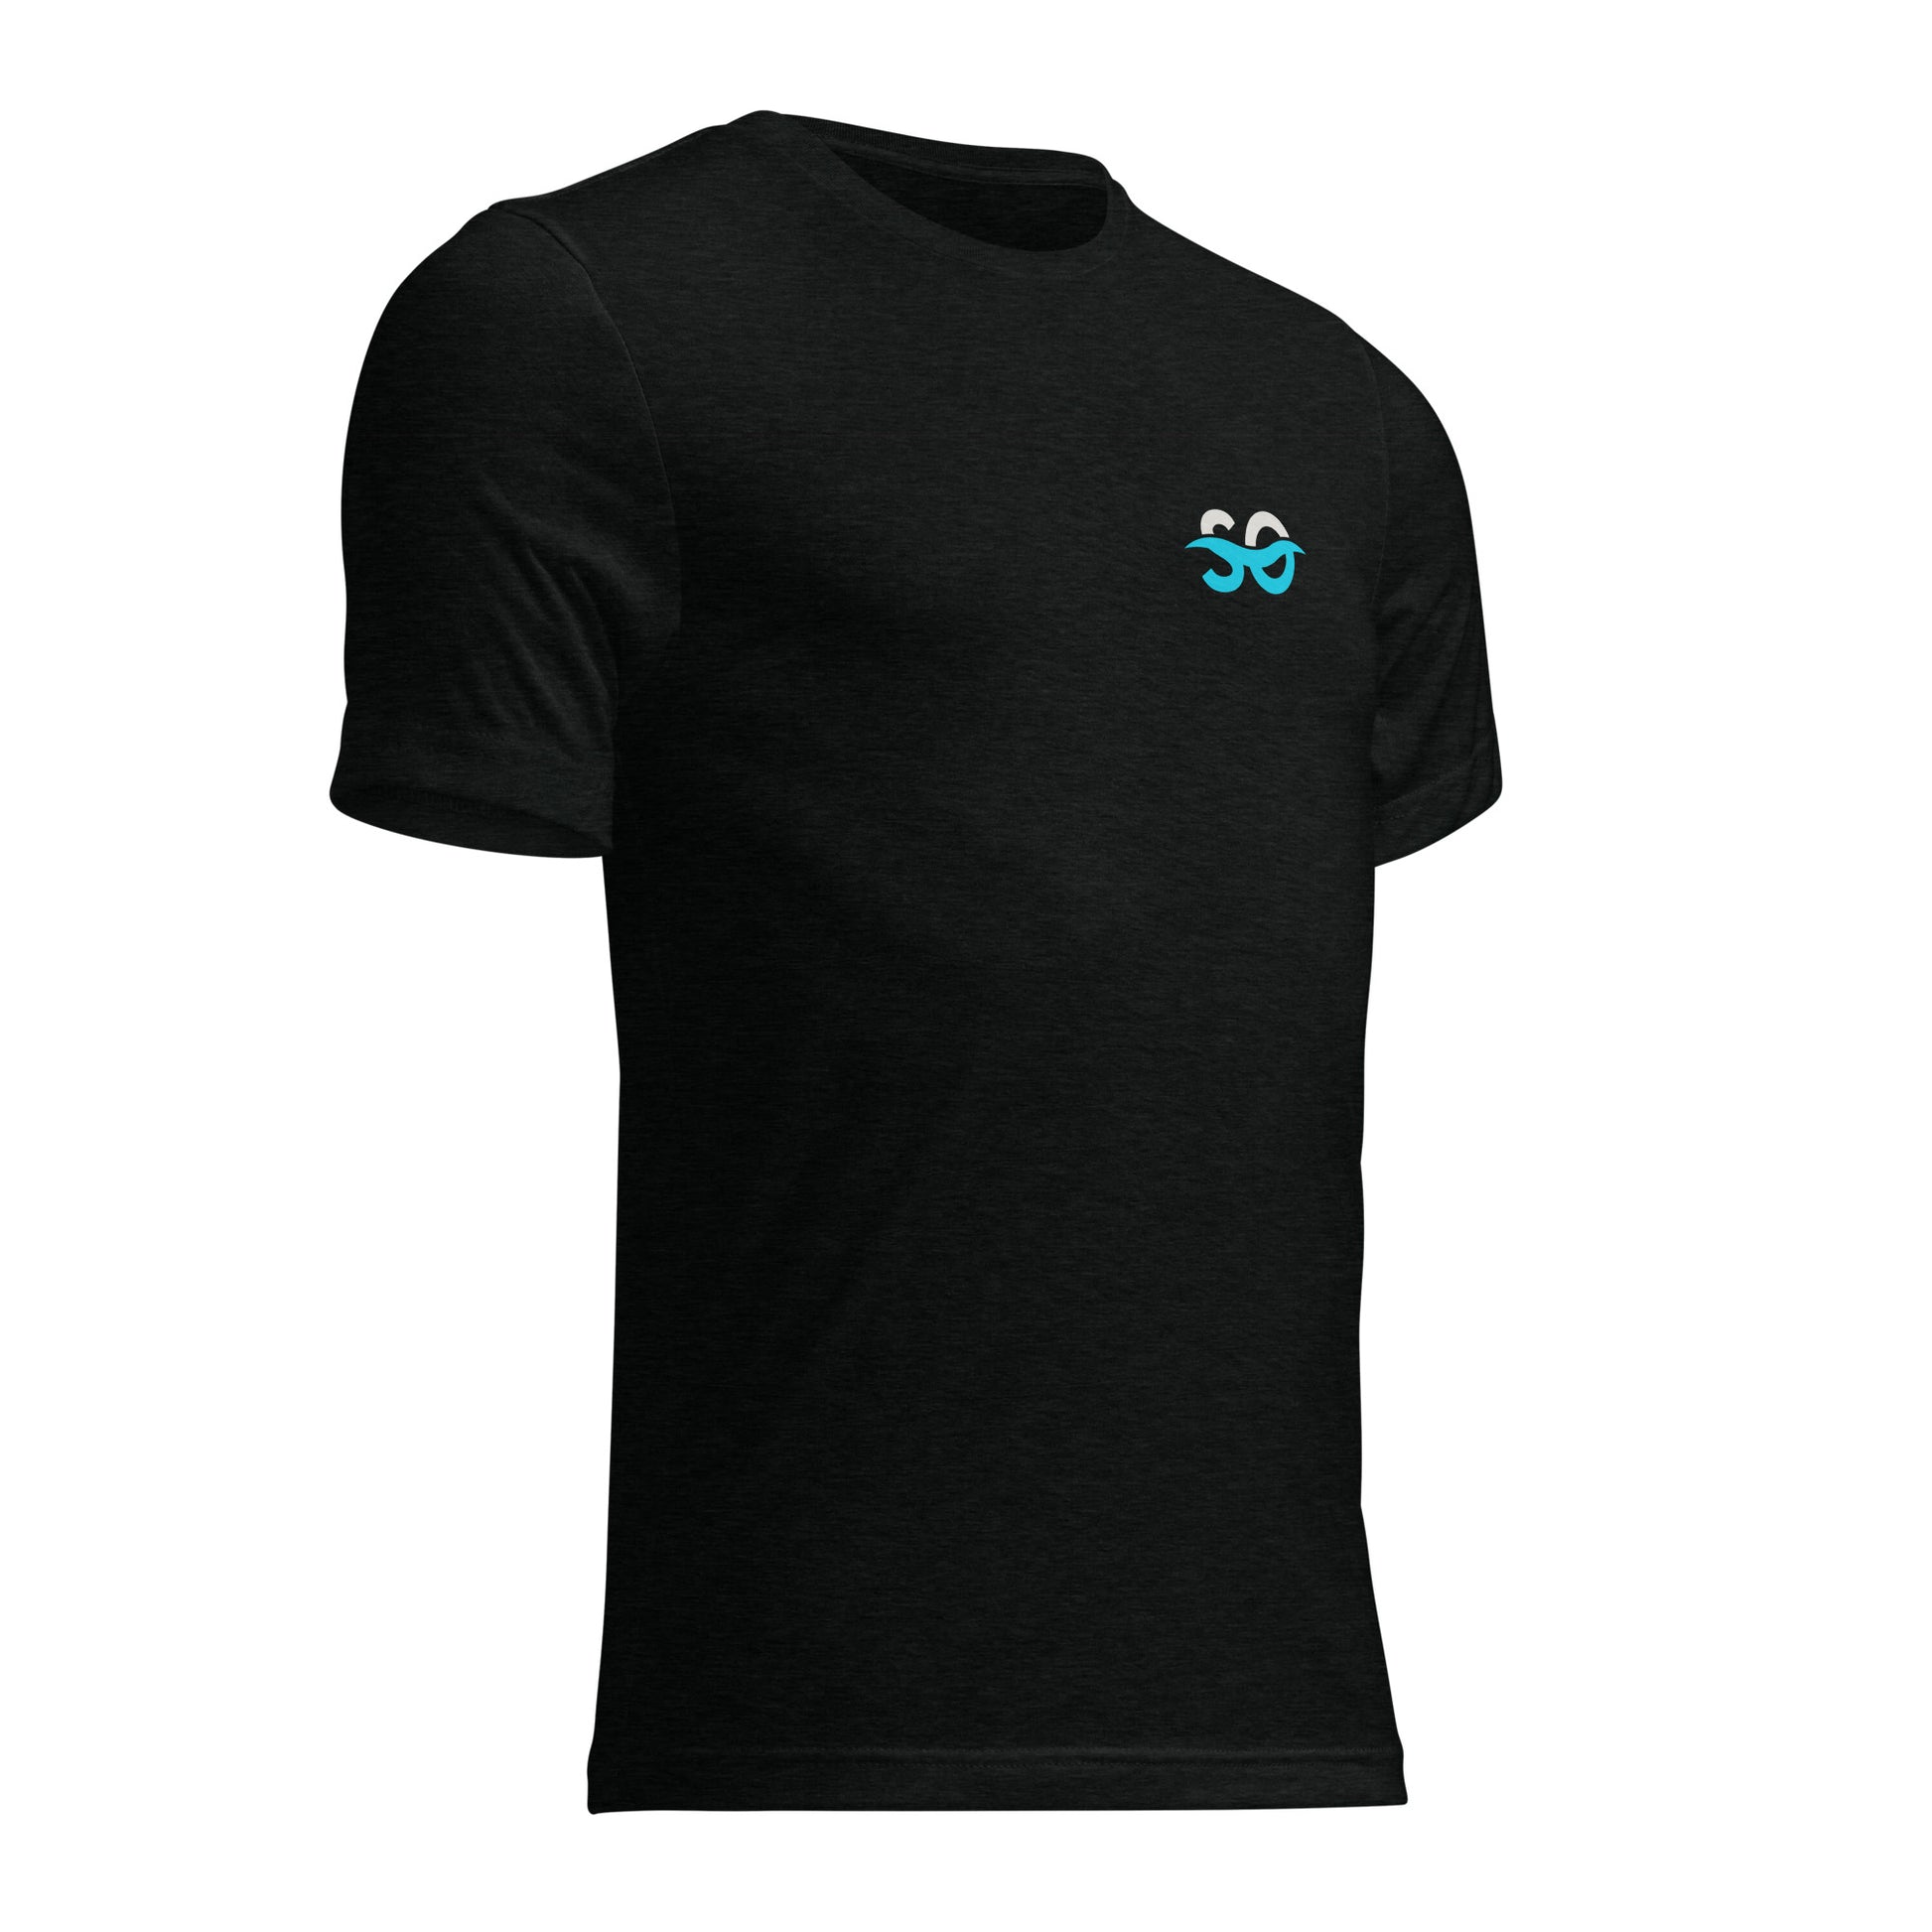 a black t - shirt with a blue logo on the chest